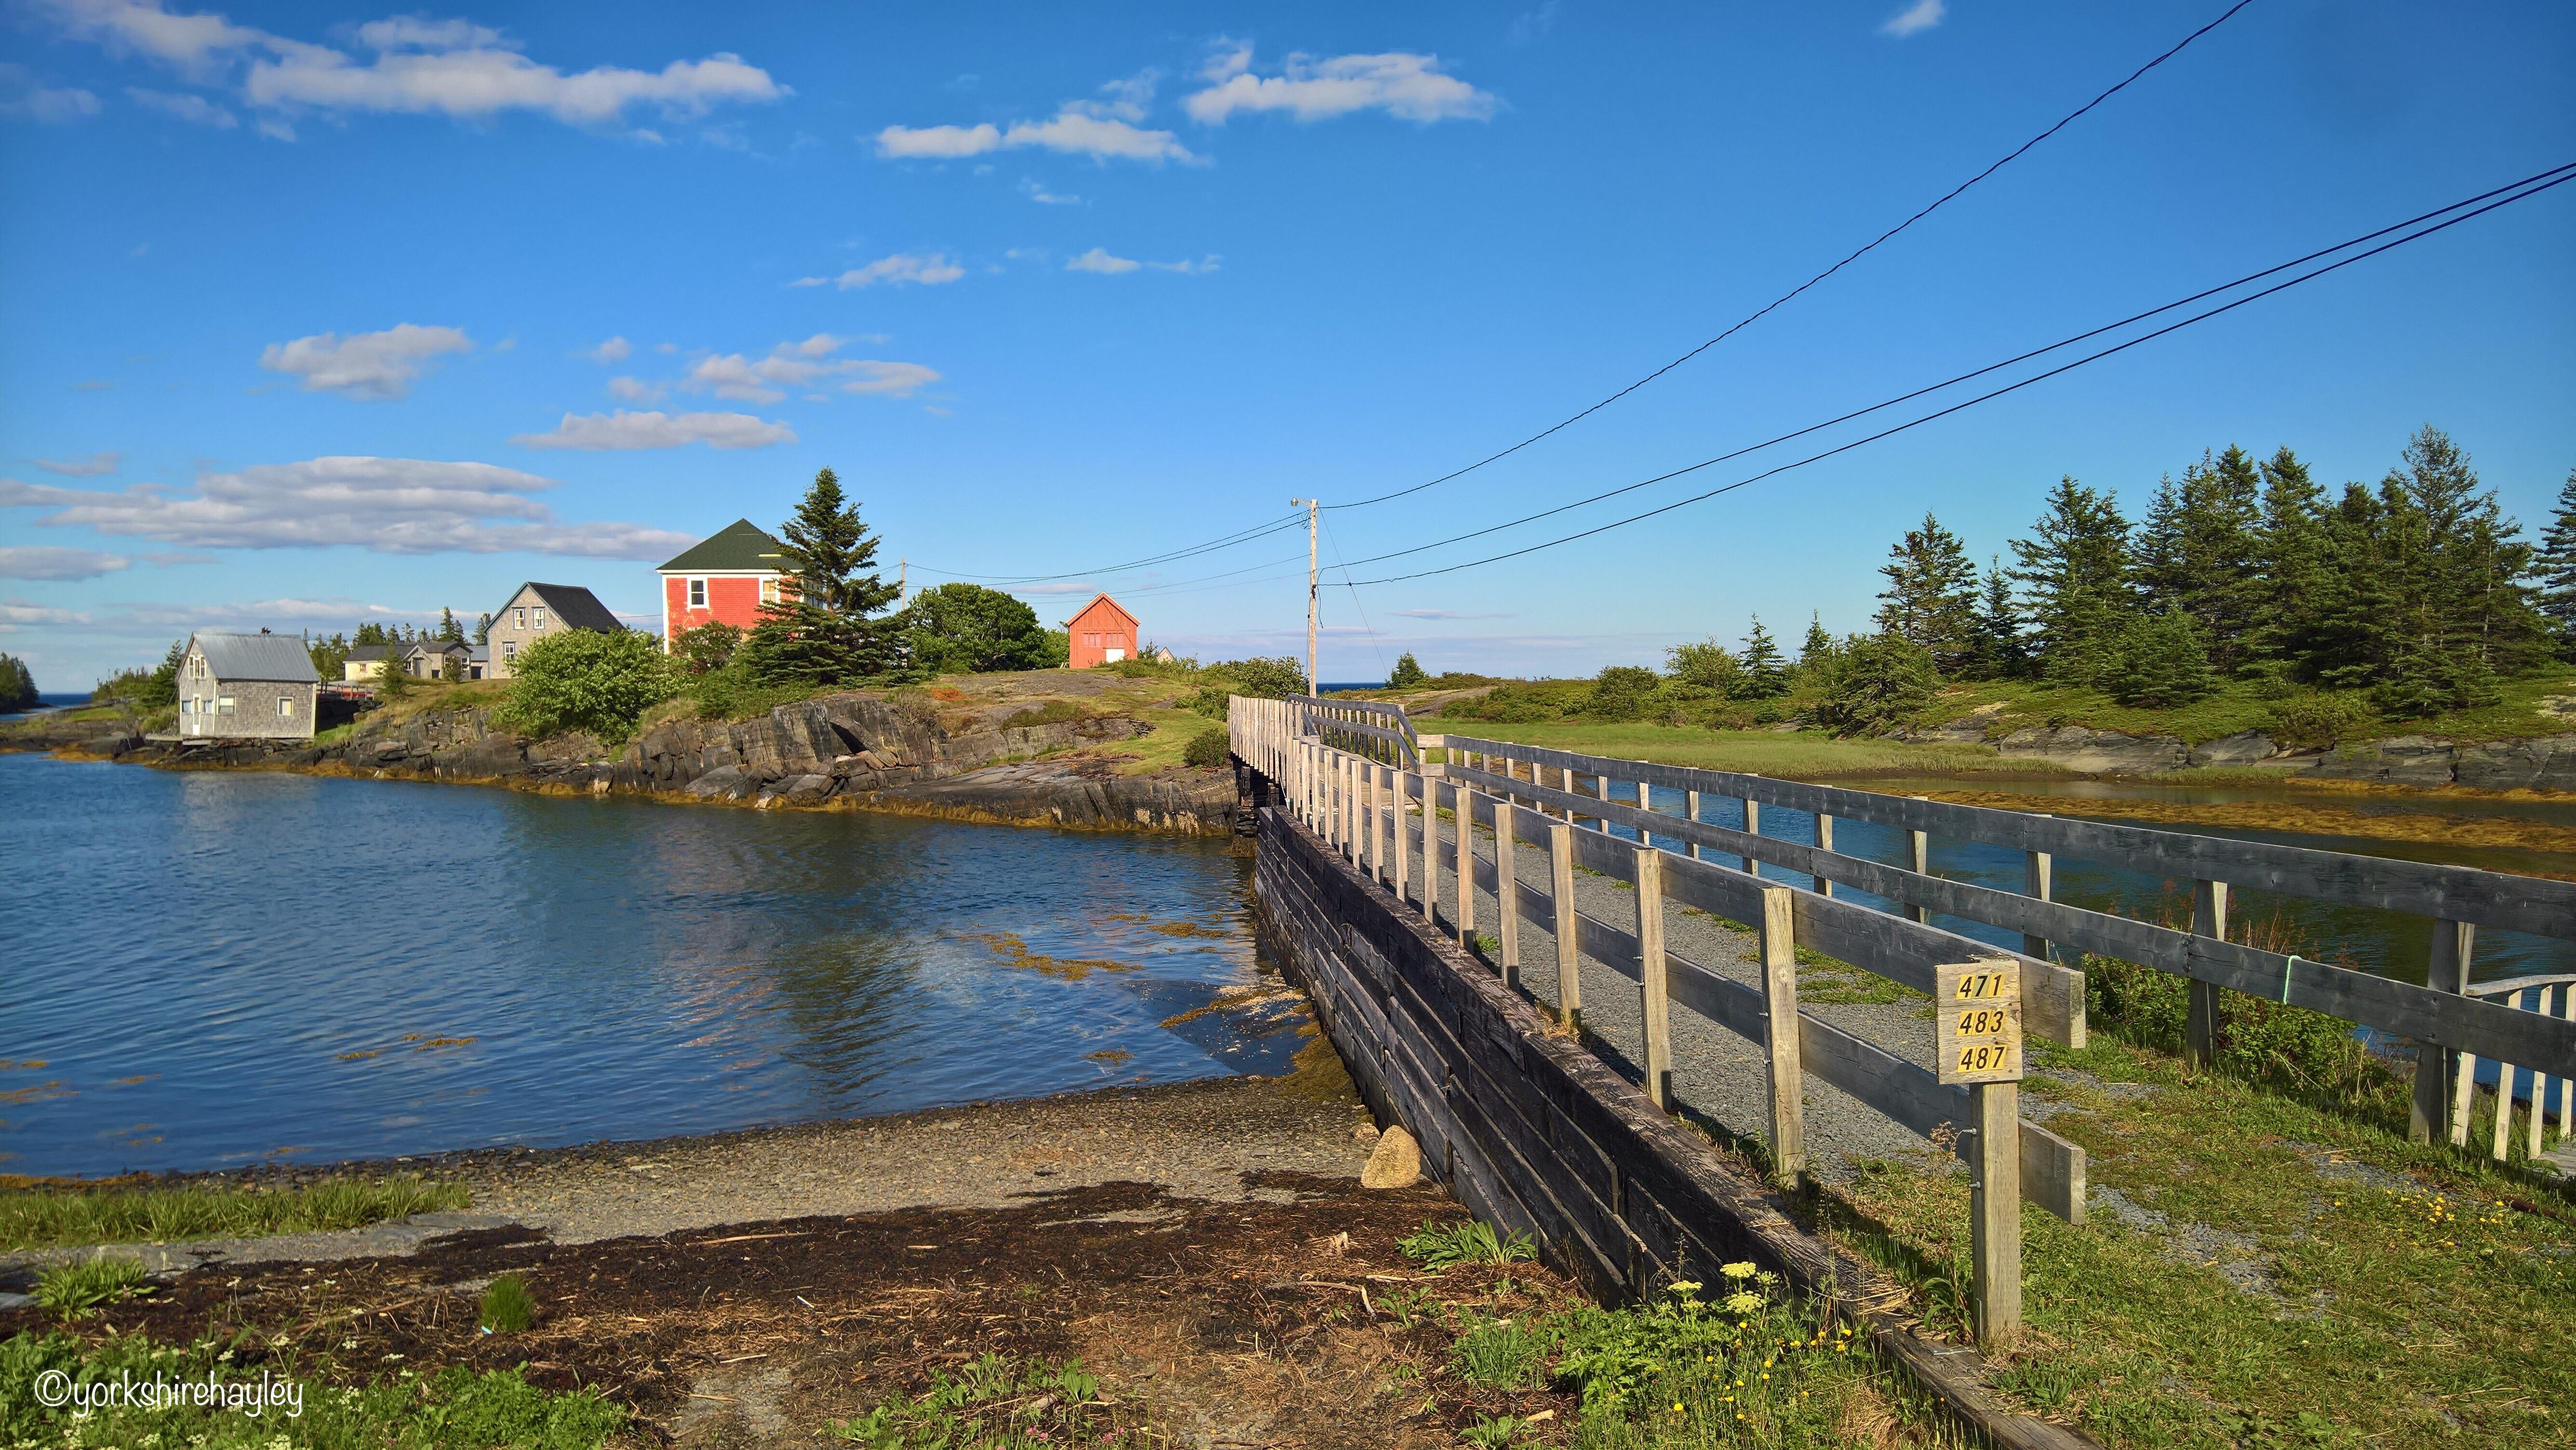 The familiar bridge that Tom Selleck walks across in the Jesse Stone films leading to the red house where Jesse Stone lives